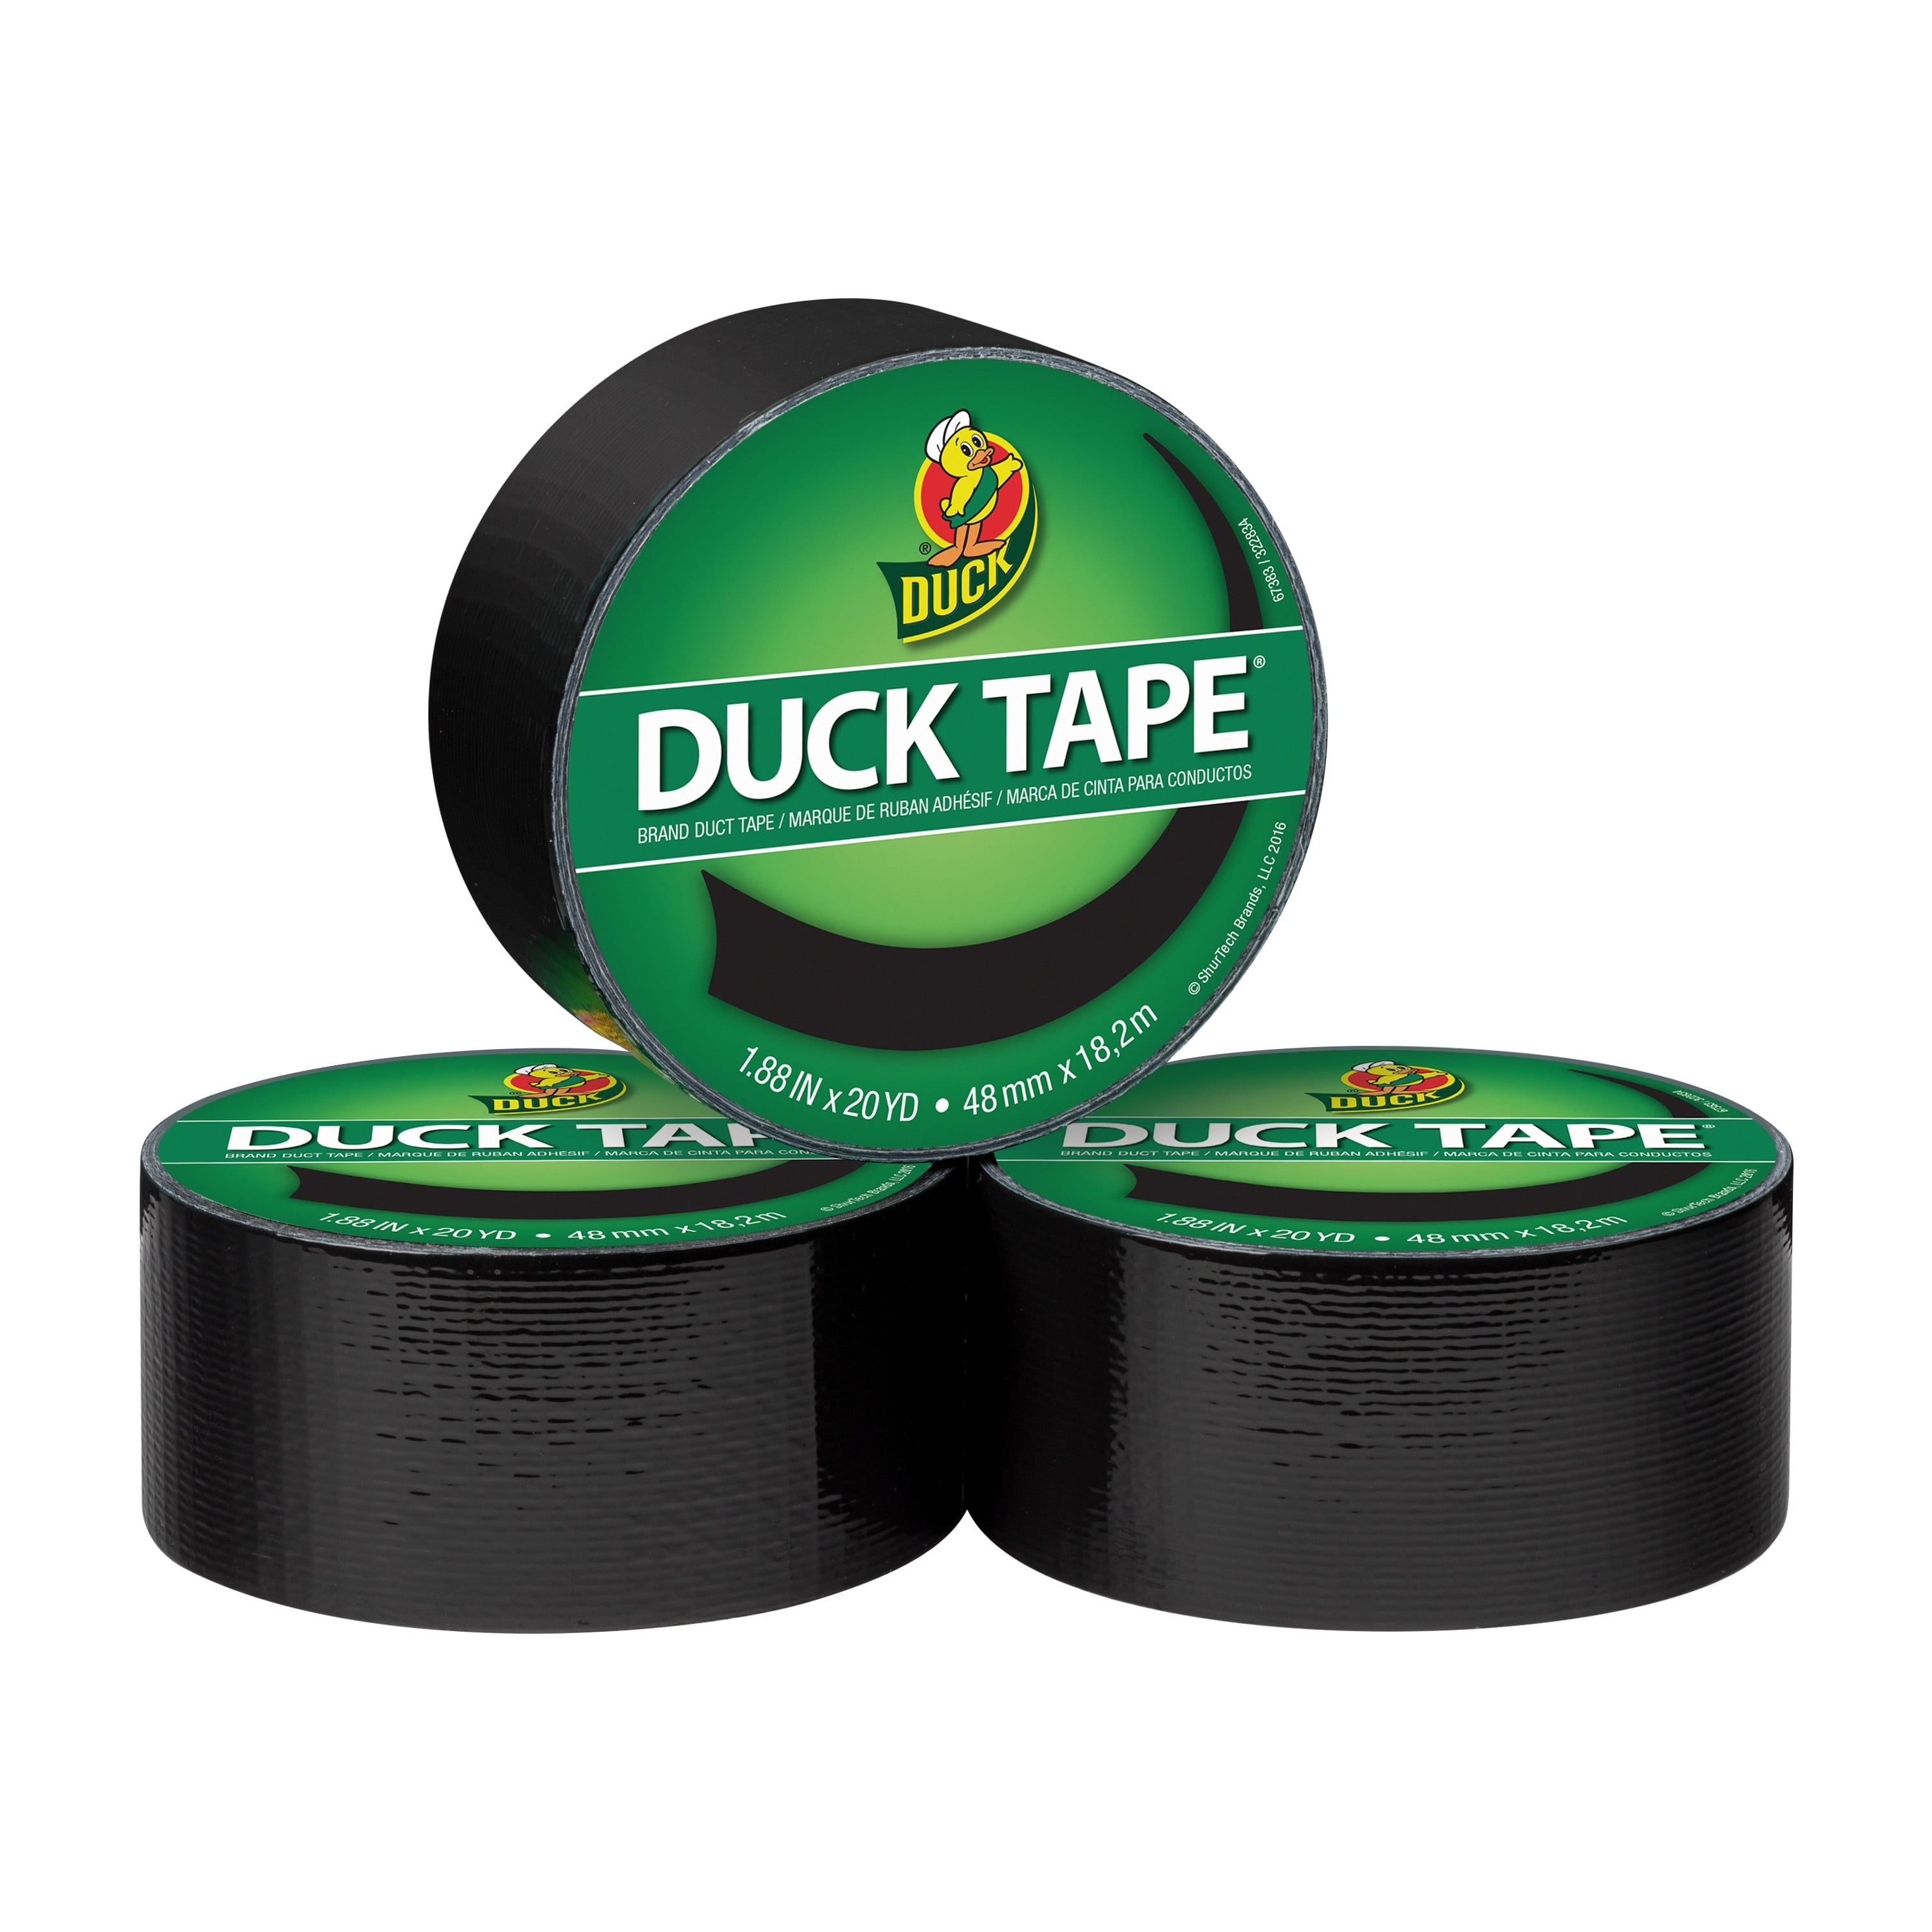 Duck Tape® Brand Duct Tape, Green, 1.88 in. x 20 yd.